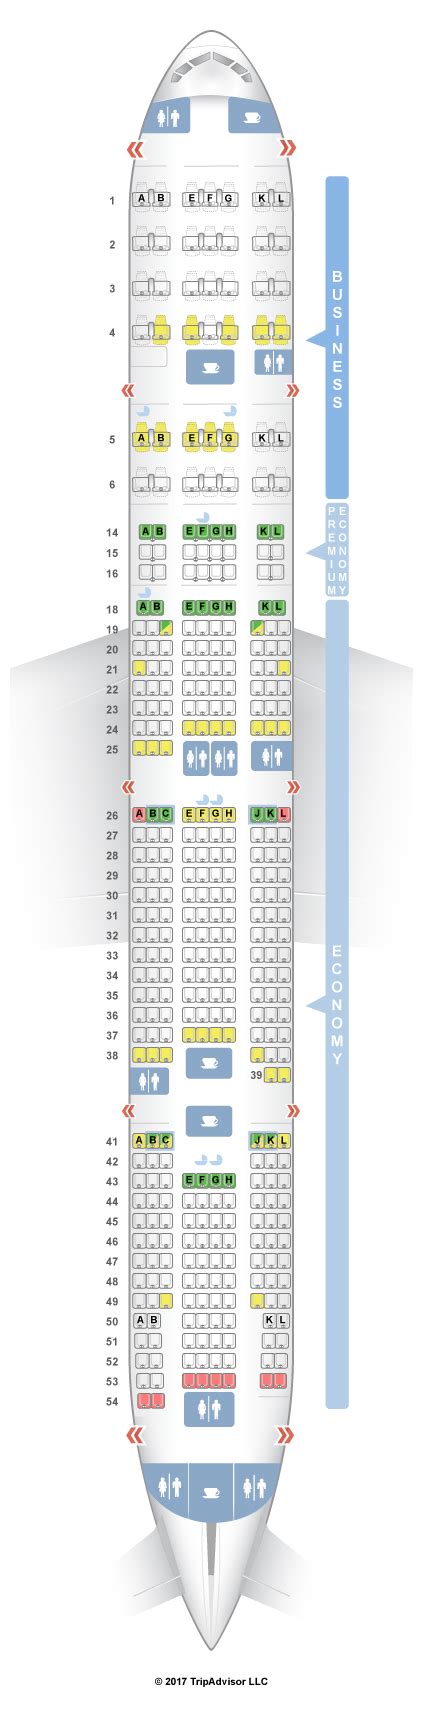 air france boeing 777-300er seating chart